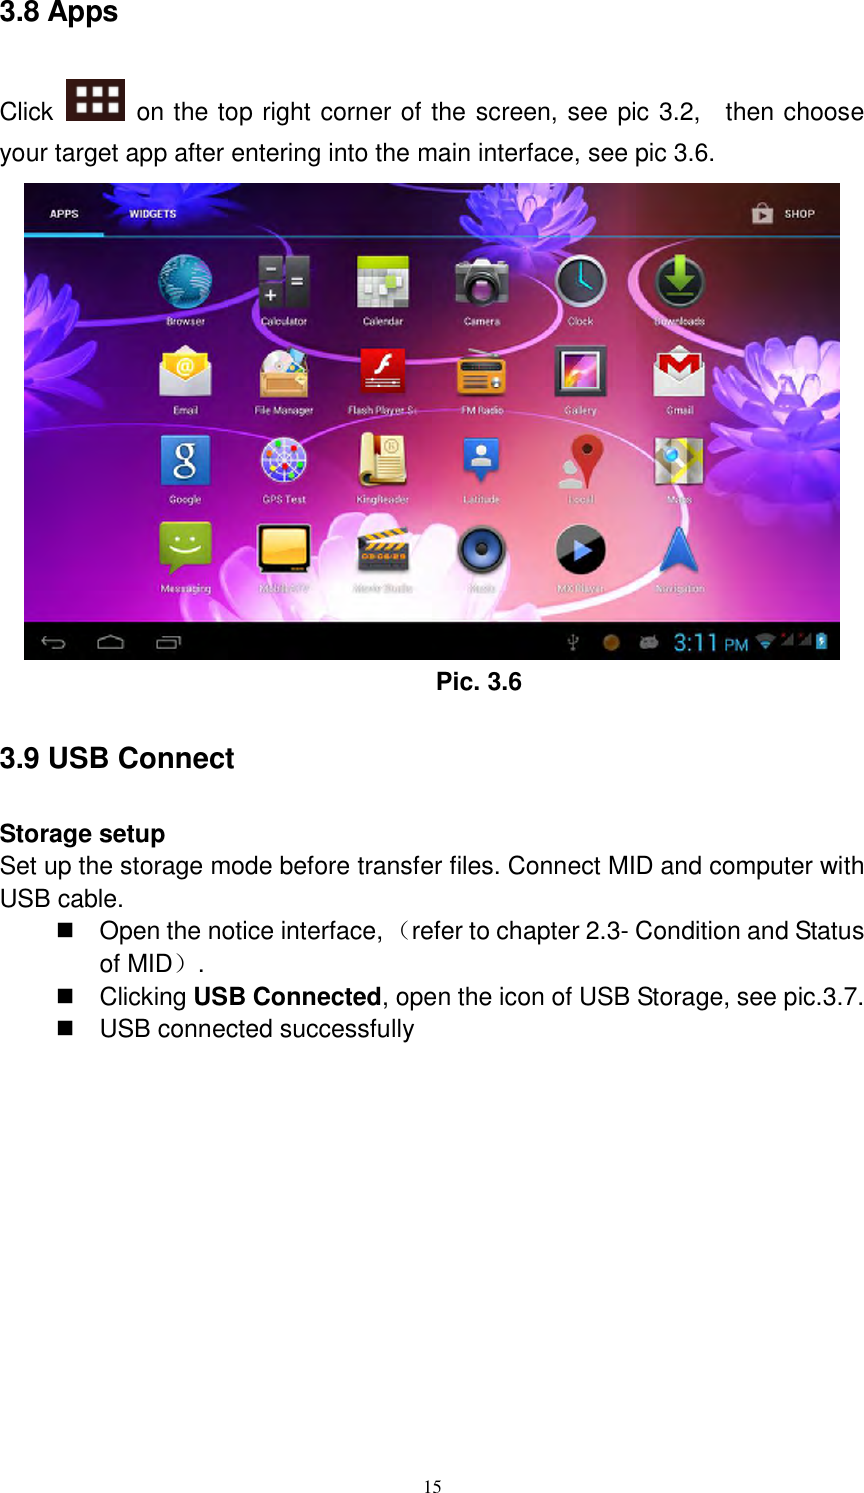      15 3.8 Apps Click    on the top right corner of the screen, see pic 3.2,    then choose your target app after entering into the main interface, see pic 3.6.  Pic. 3.6 3.9 USB Connect Storage setup Set up the storage mode before transfer files. Connect MID and computer with USB cable.   Open the notice interface, （refer to chapter 2.3- Condition and Status of MID）.     Clicking USB Connected, open the icon of USB Storage, see pic.3.7.   USB connected successfully   